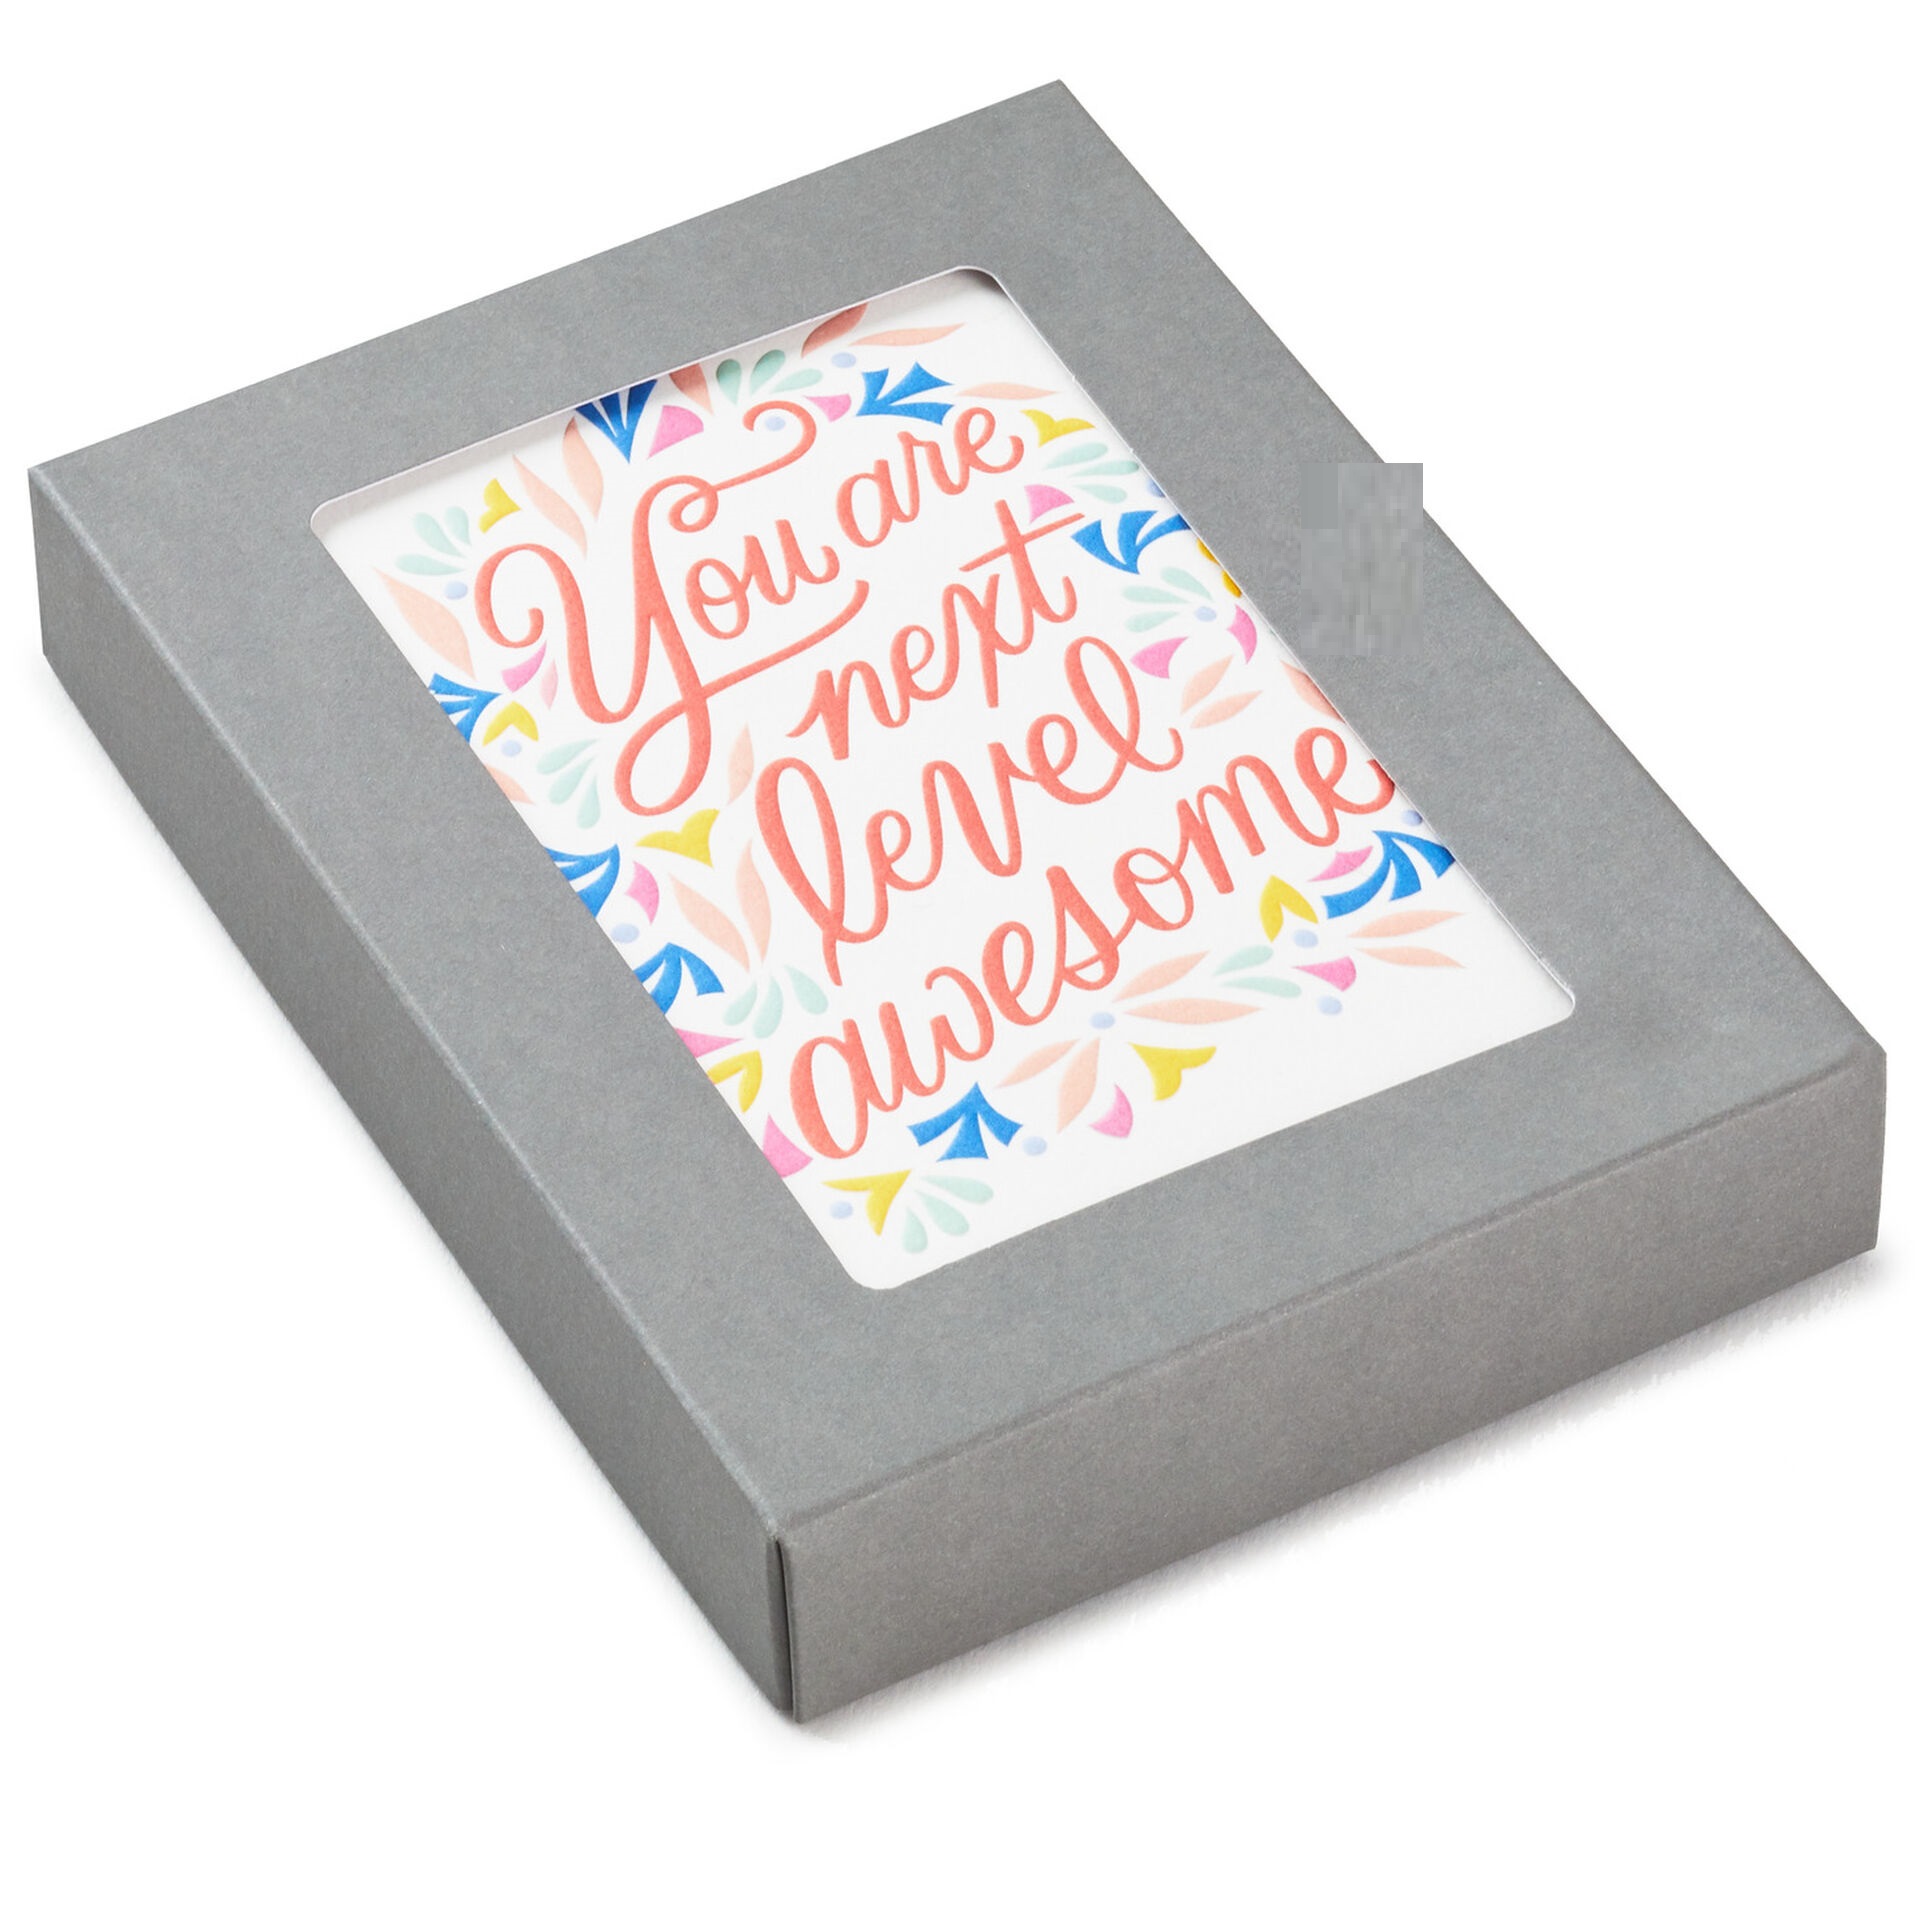 Lettering-and-Wreath-Boxed-Blank-Note-Cards-Multipack_1NOT1519_01